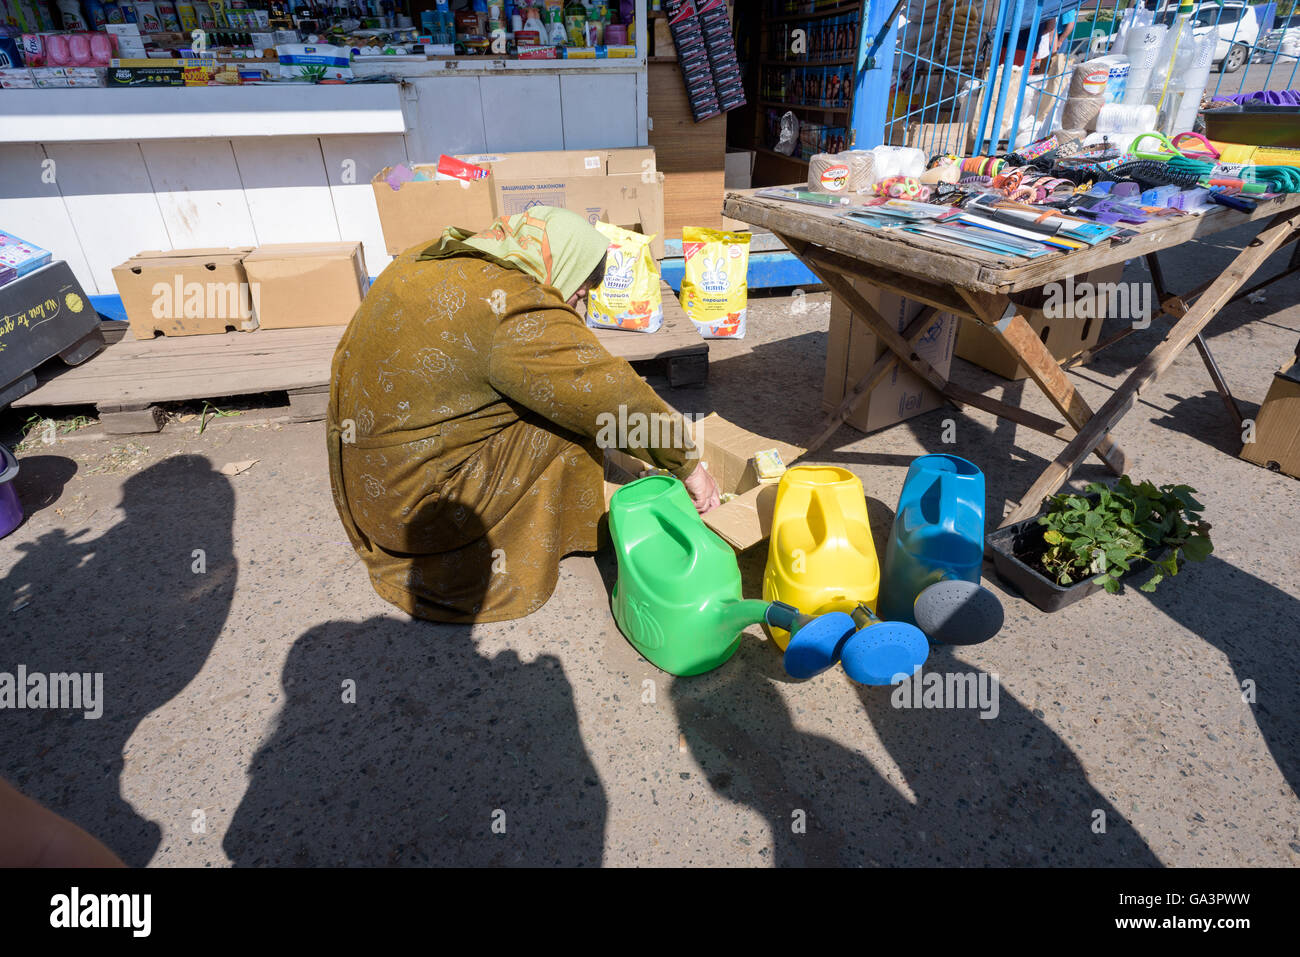 Women looking through bags of soap at a local market in Russia Stock Photo